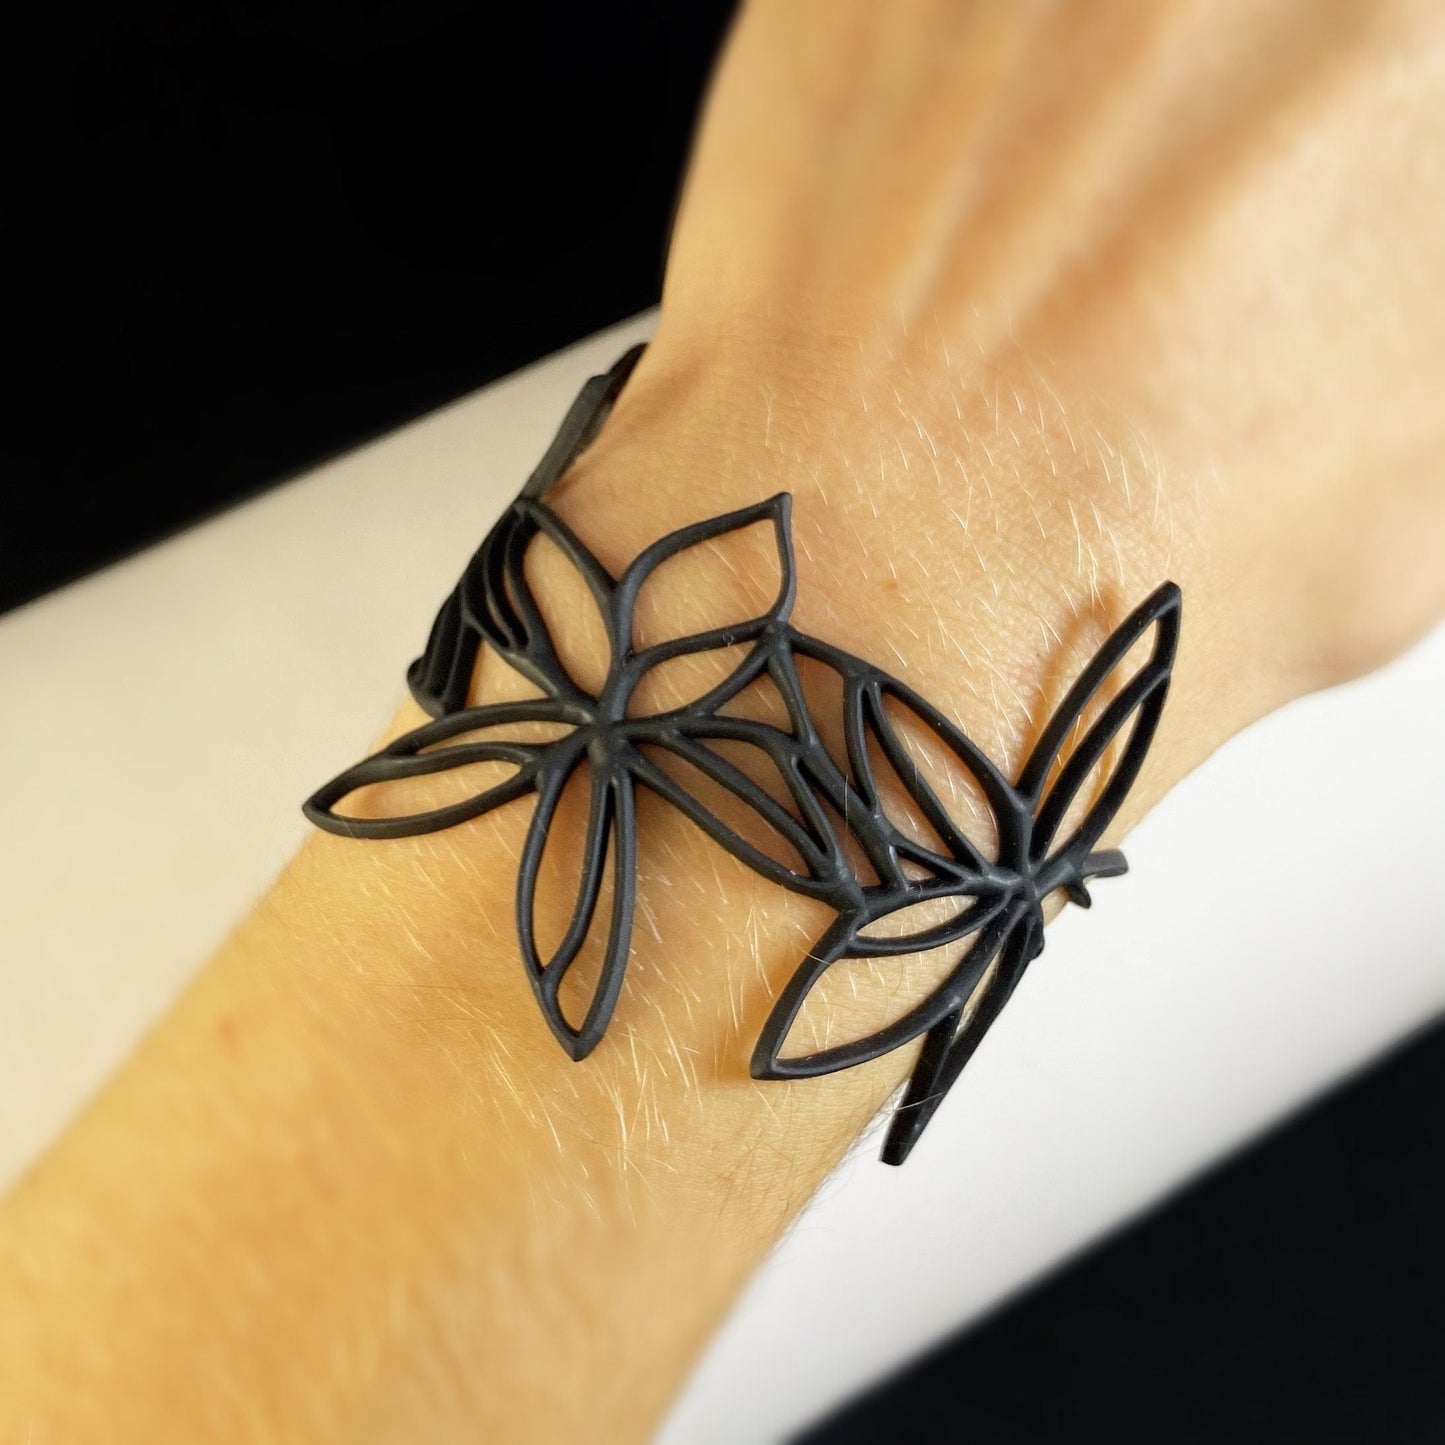 Flexible and Lightweight Bracelet - Nickel-free, Latex-free, Handcrafted from Recyclable Materials